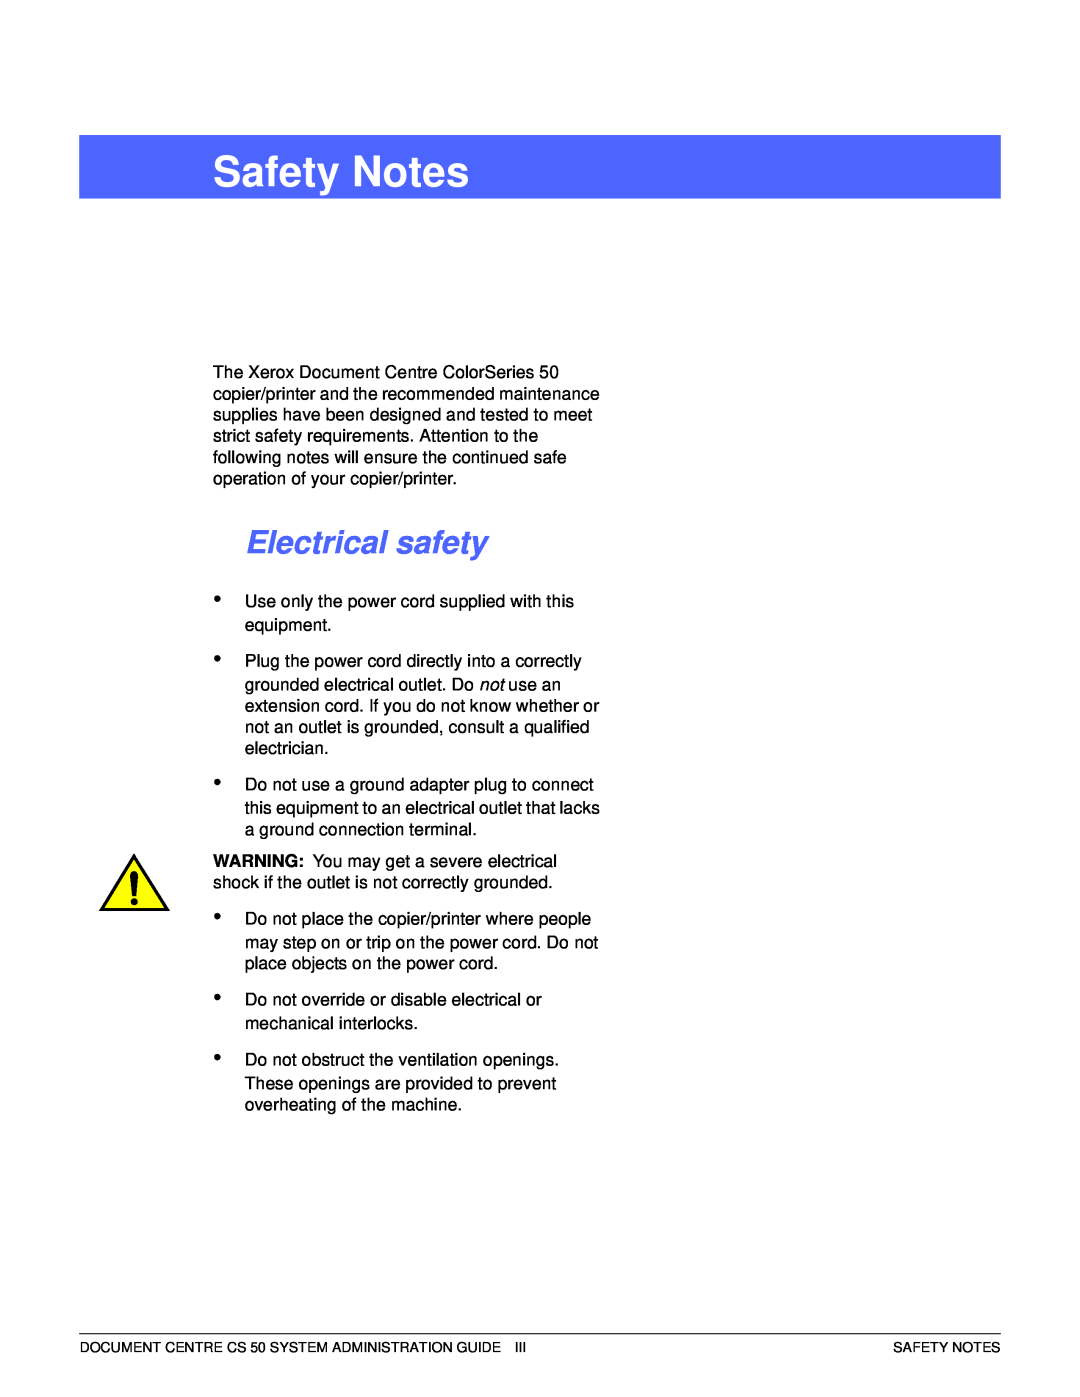 Xerox 50 manual Safety Notes, Electrical safety, 1 2 3 4 5 6 7 